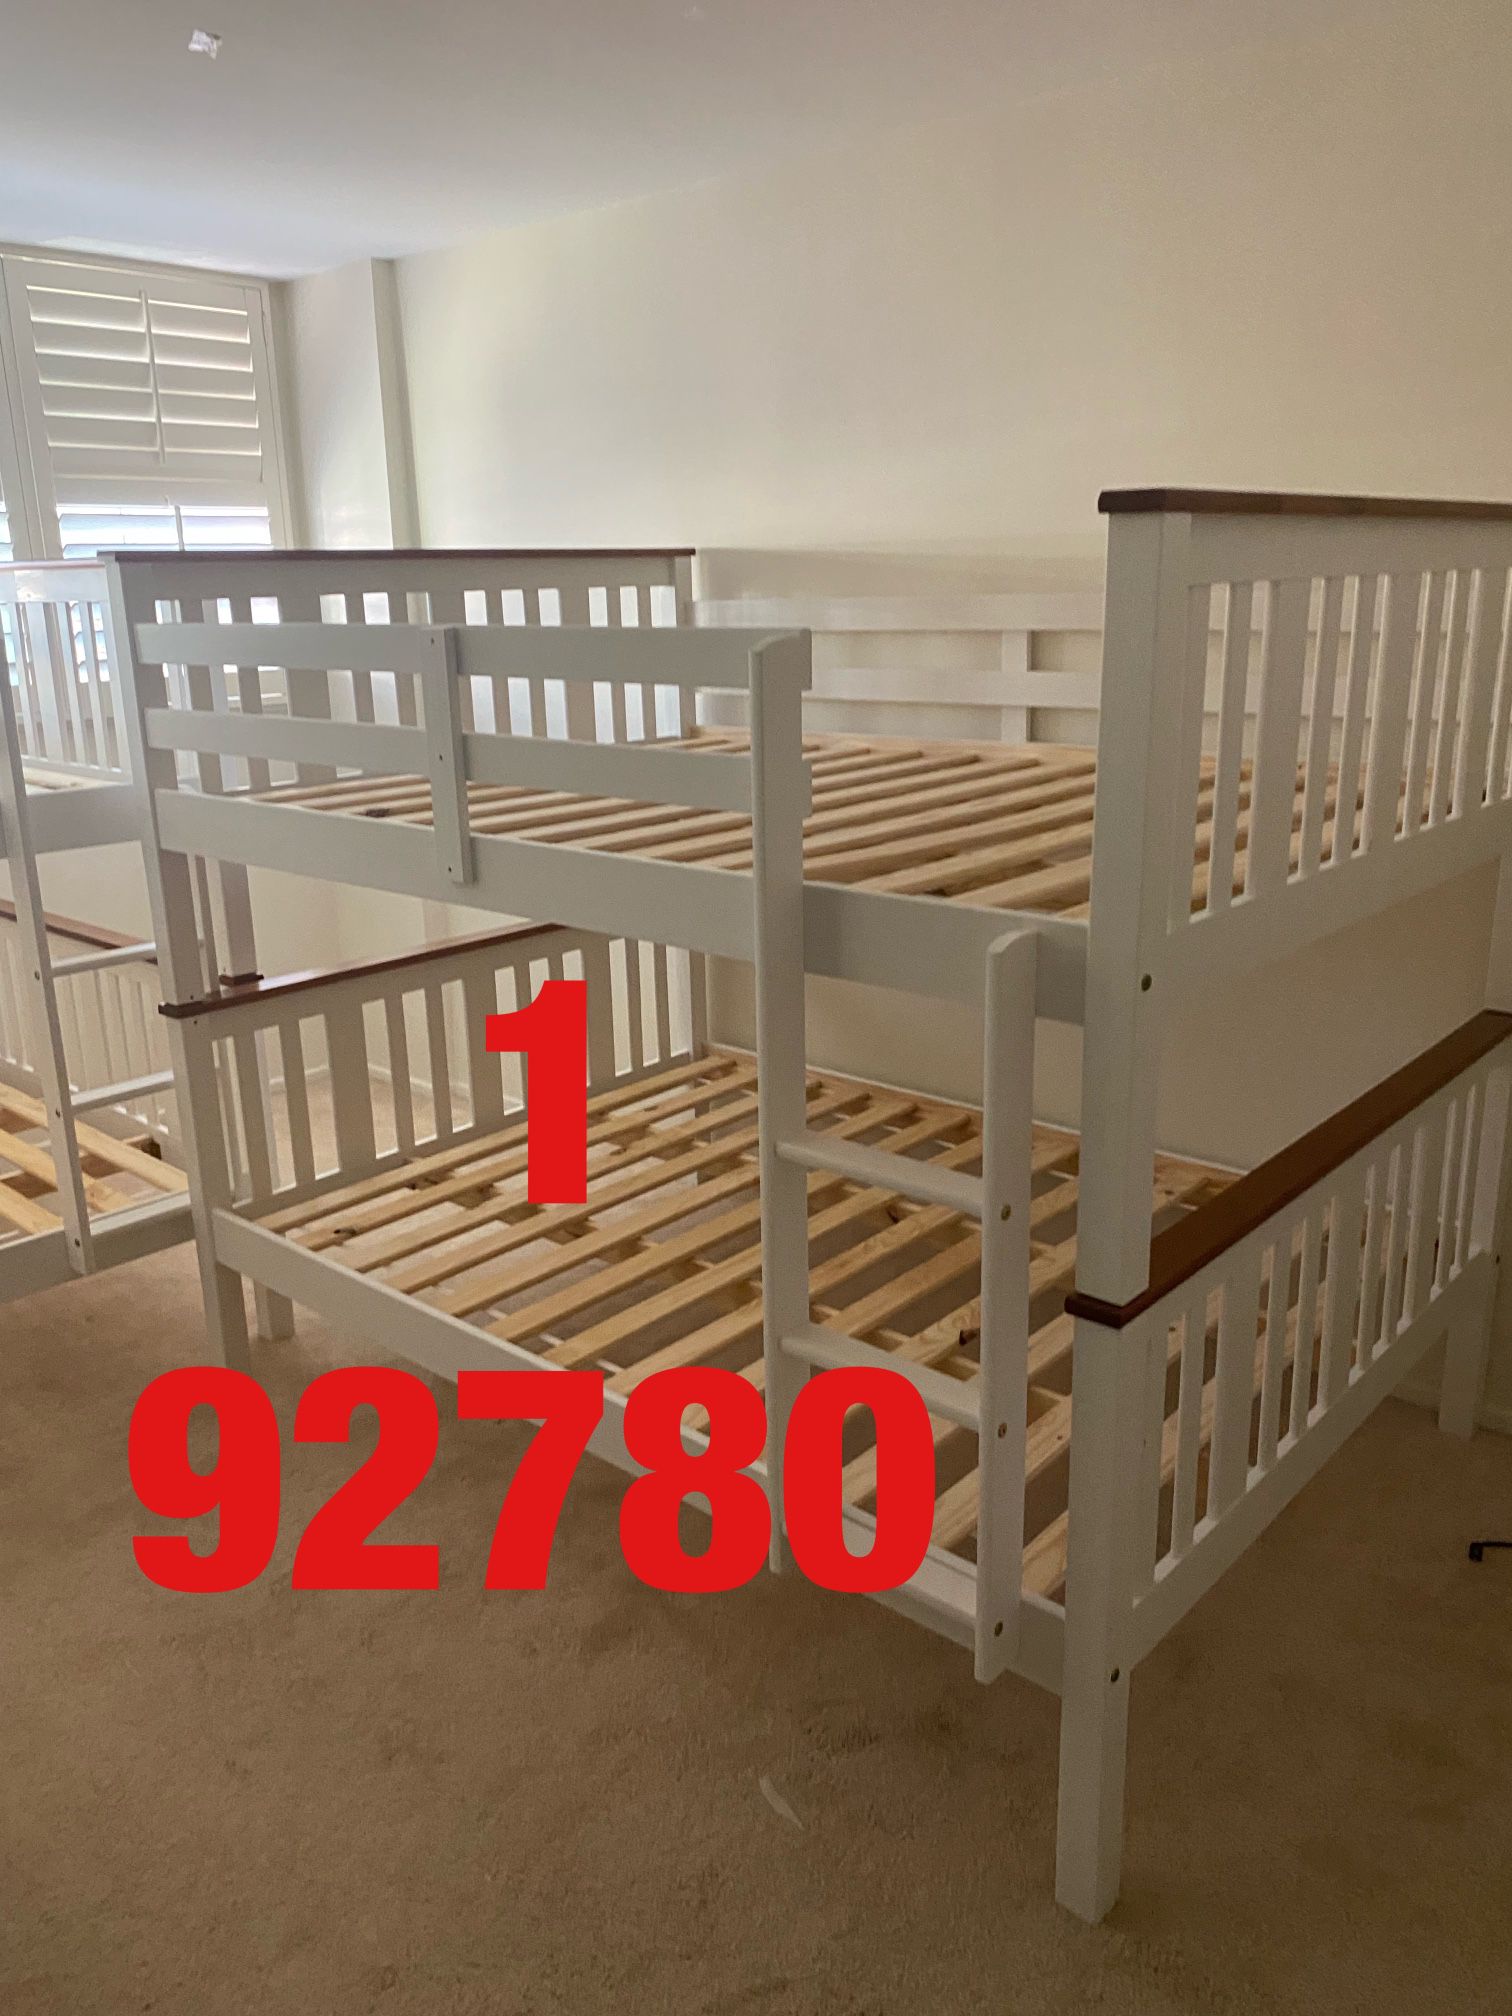   Full over Full bunk bed. Espresso & white-$499.90. Full mattresses -$125.00 each. Assembly not included. Free delivery.